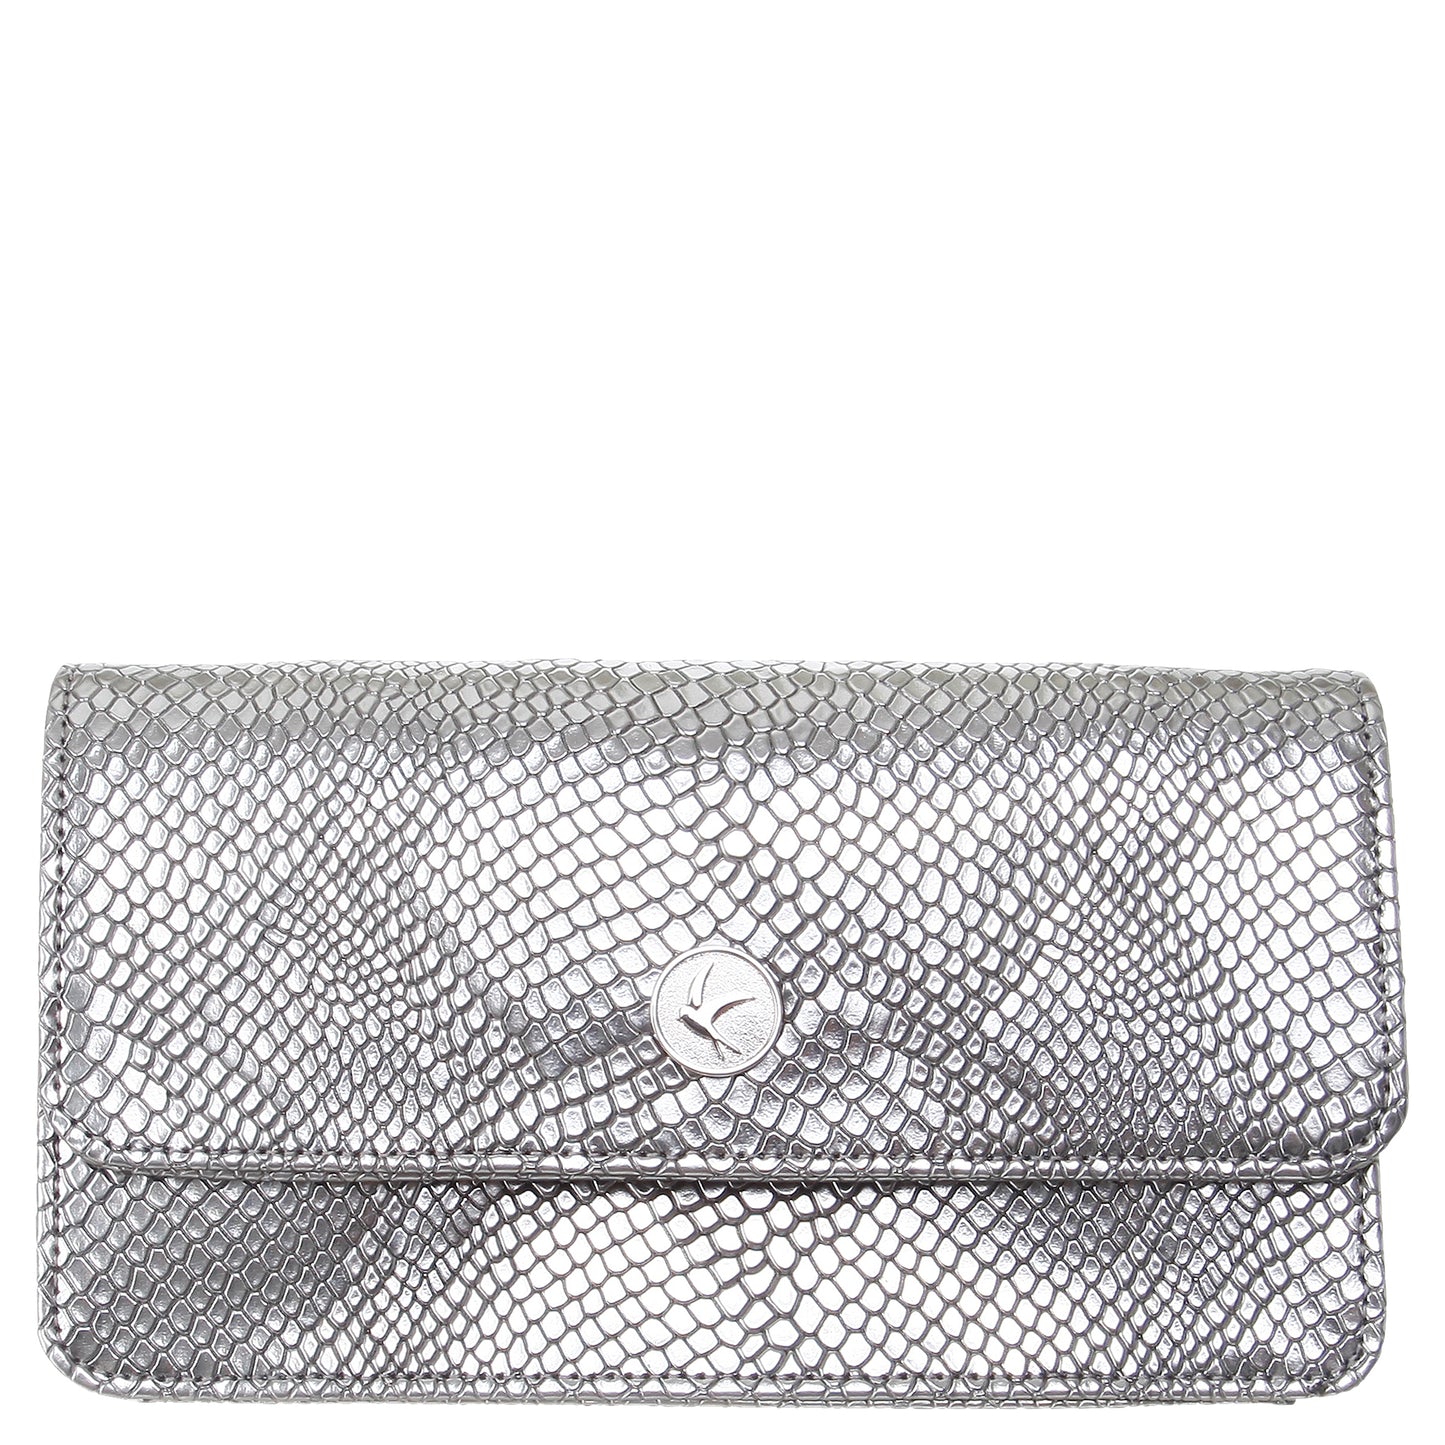 Silver Faux Snakeskin Wallet Purse with Chain, Sara, Svala